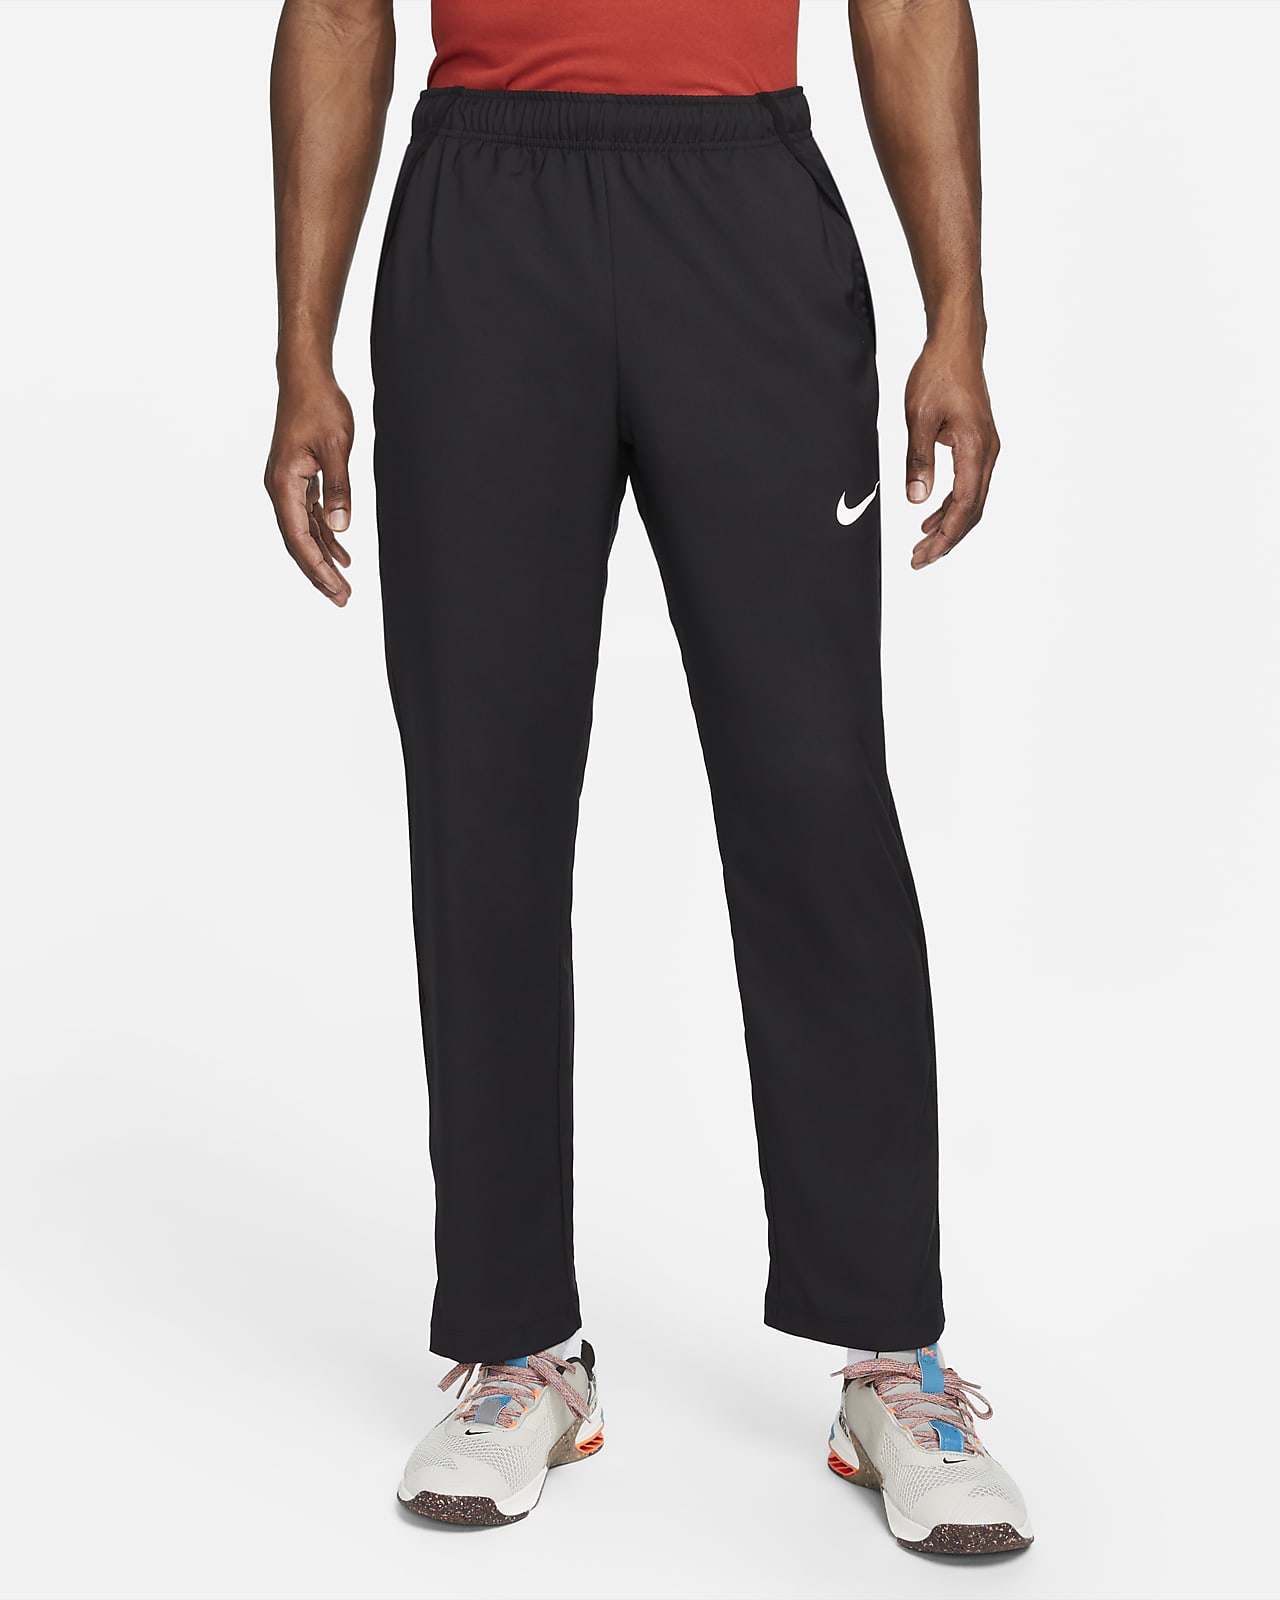 Nike Dri-Fit Athletic Pants Men's Navy New with Tags M 860 - Locker Room  Direct